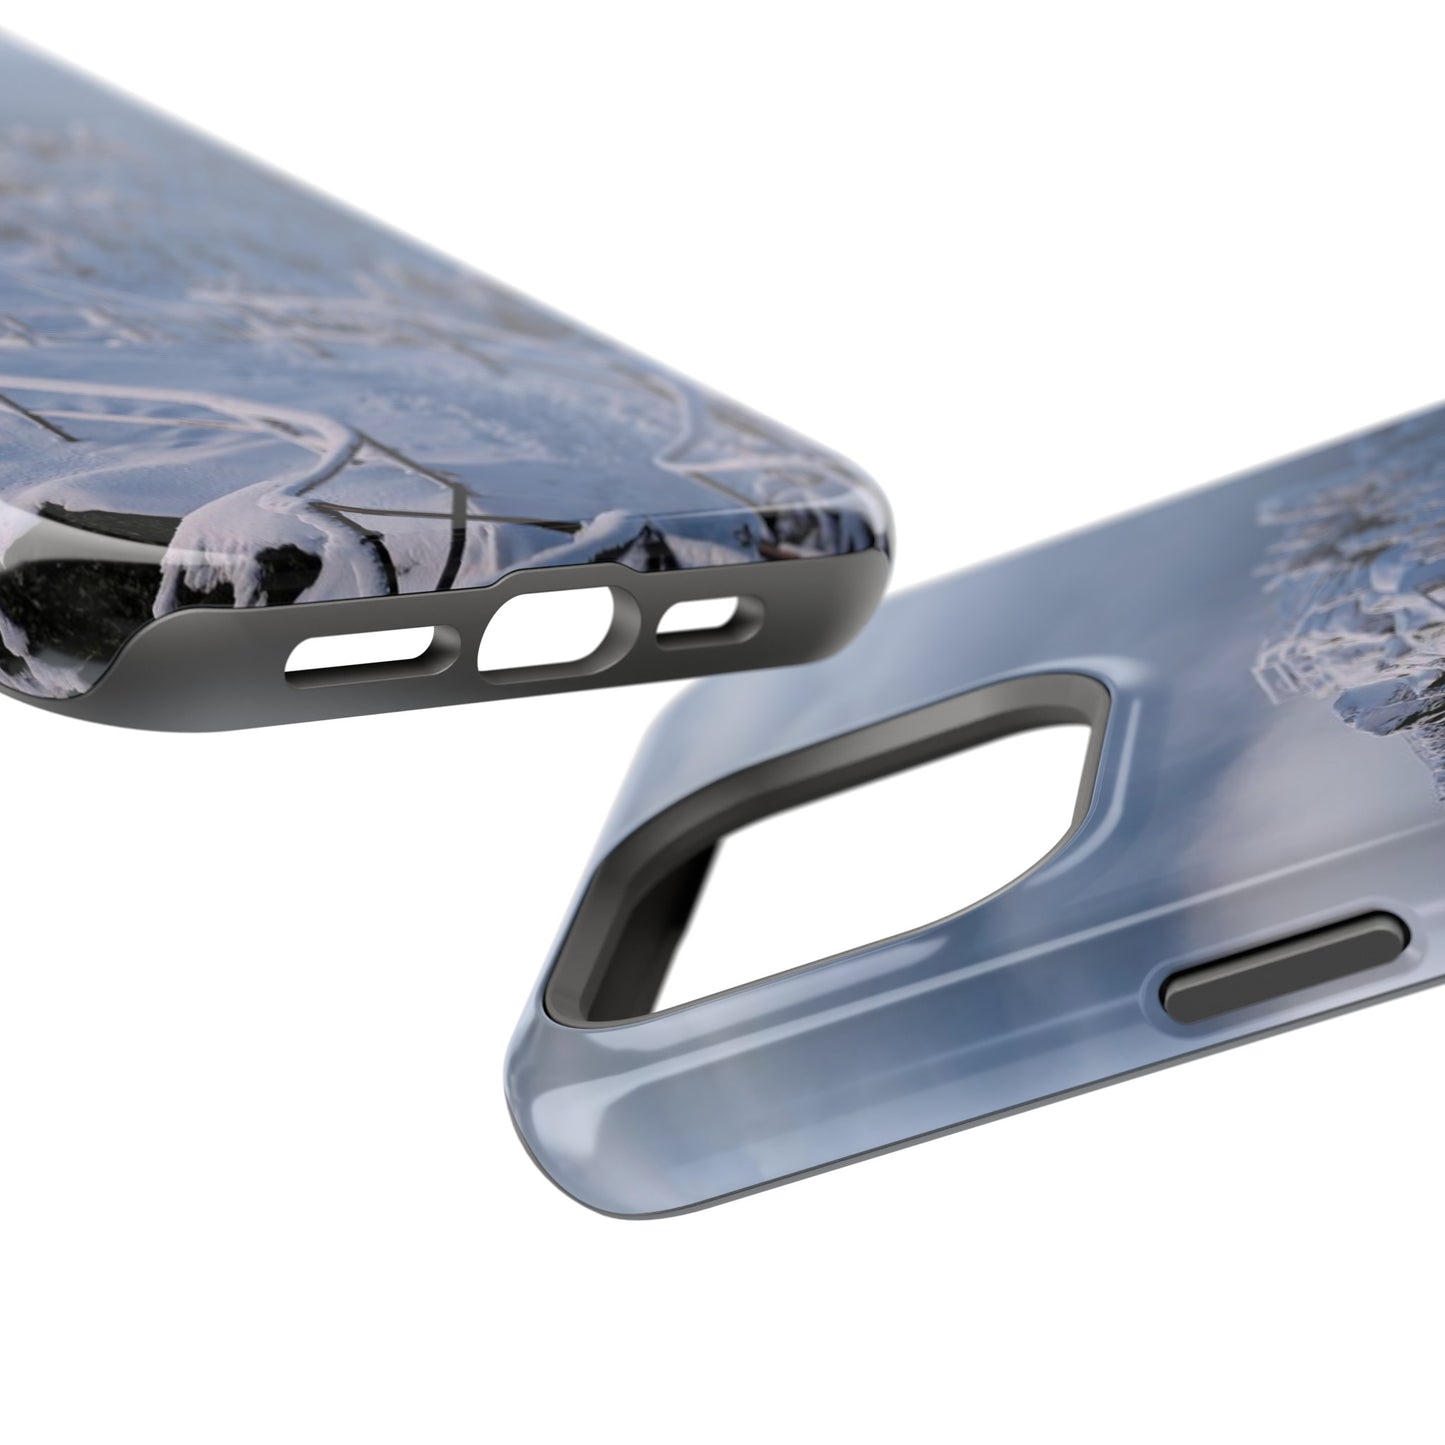 MagSafe Impact Resistant Phone Case - Whiteface Castle in the Clouds